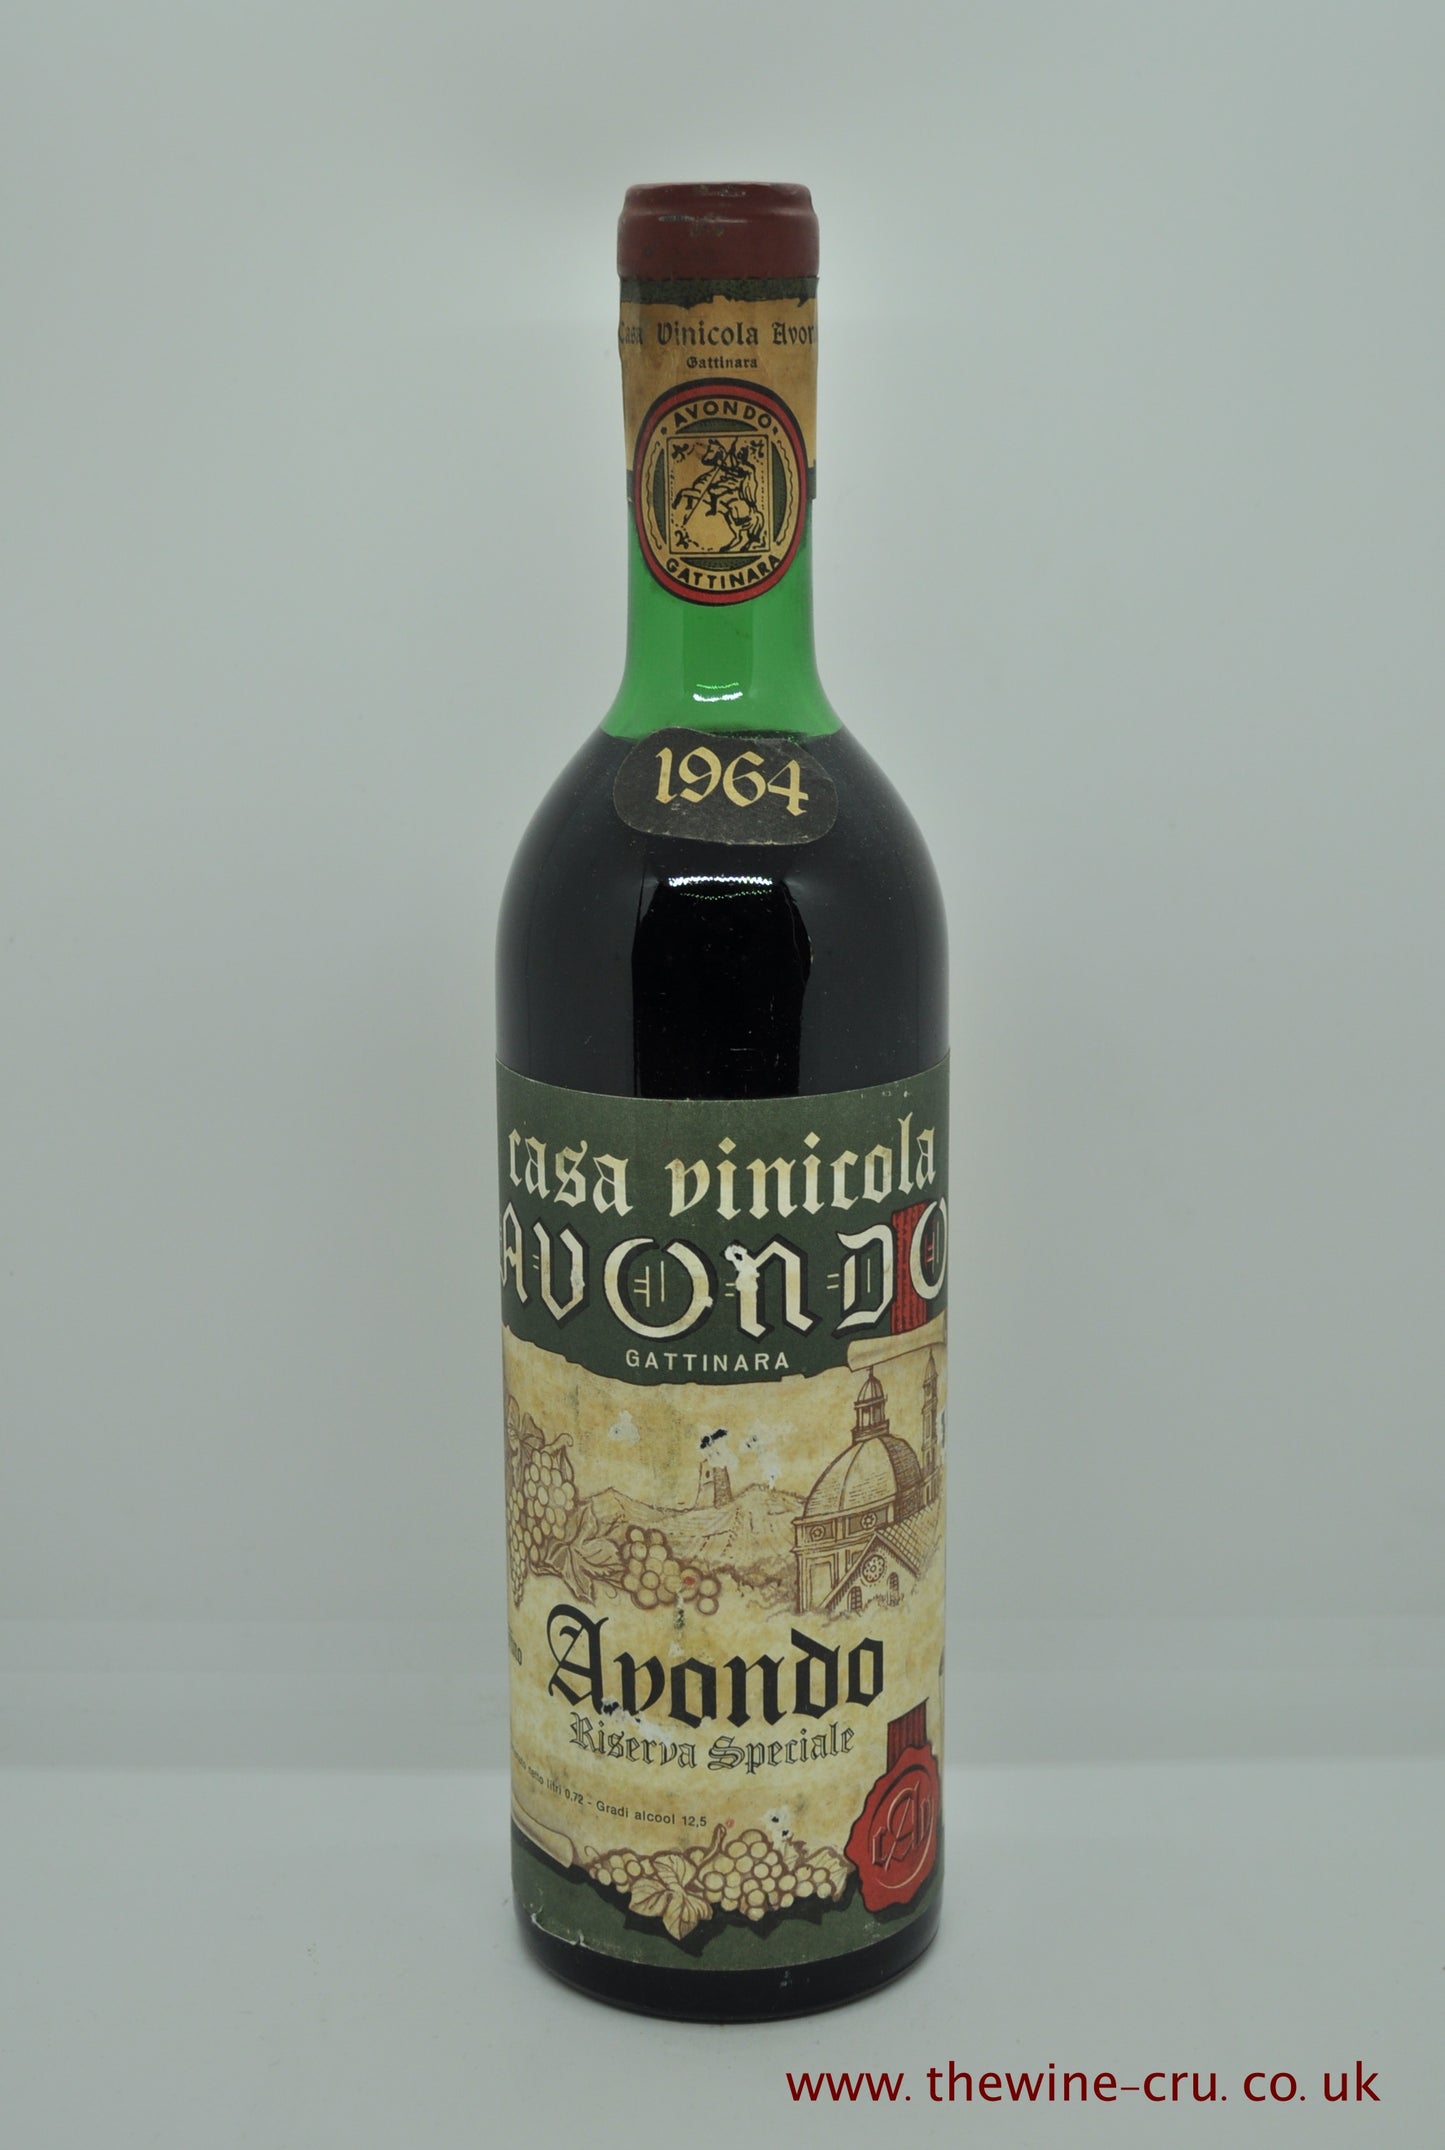 1964 vintage red wine. Avondo Gattinara Reserva Speciale 1964. Italy. Immediate delivery. free local delivery. Gift wrapping available.